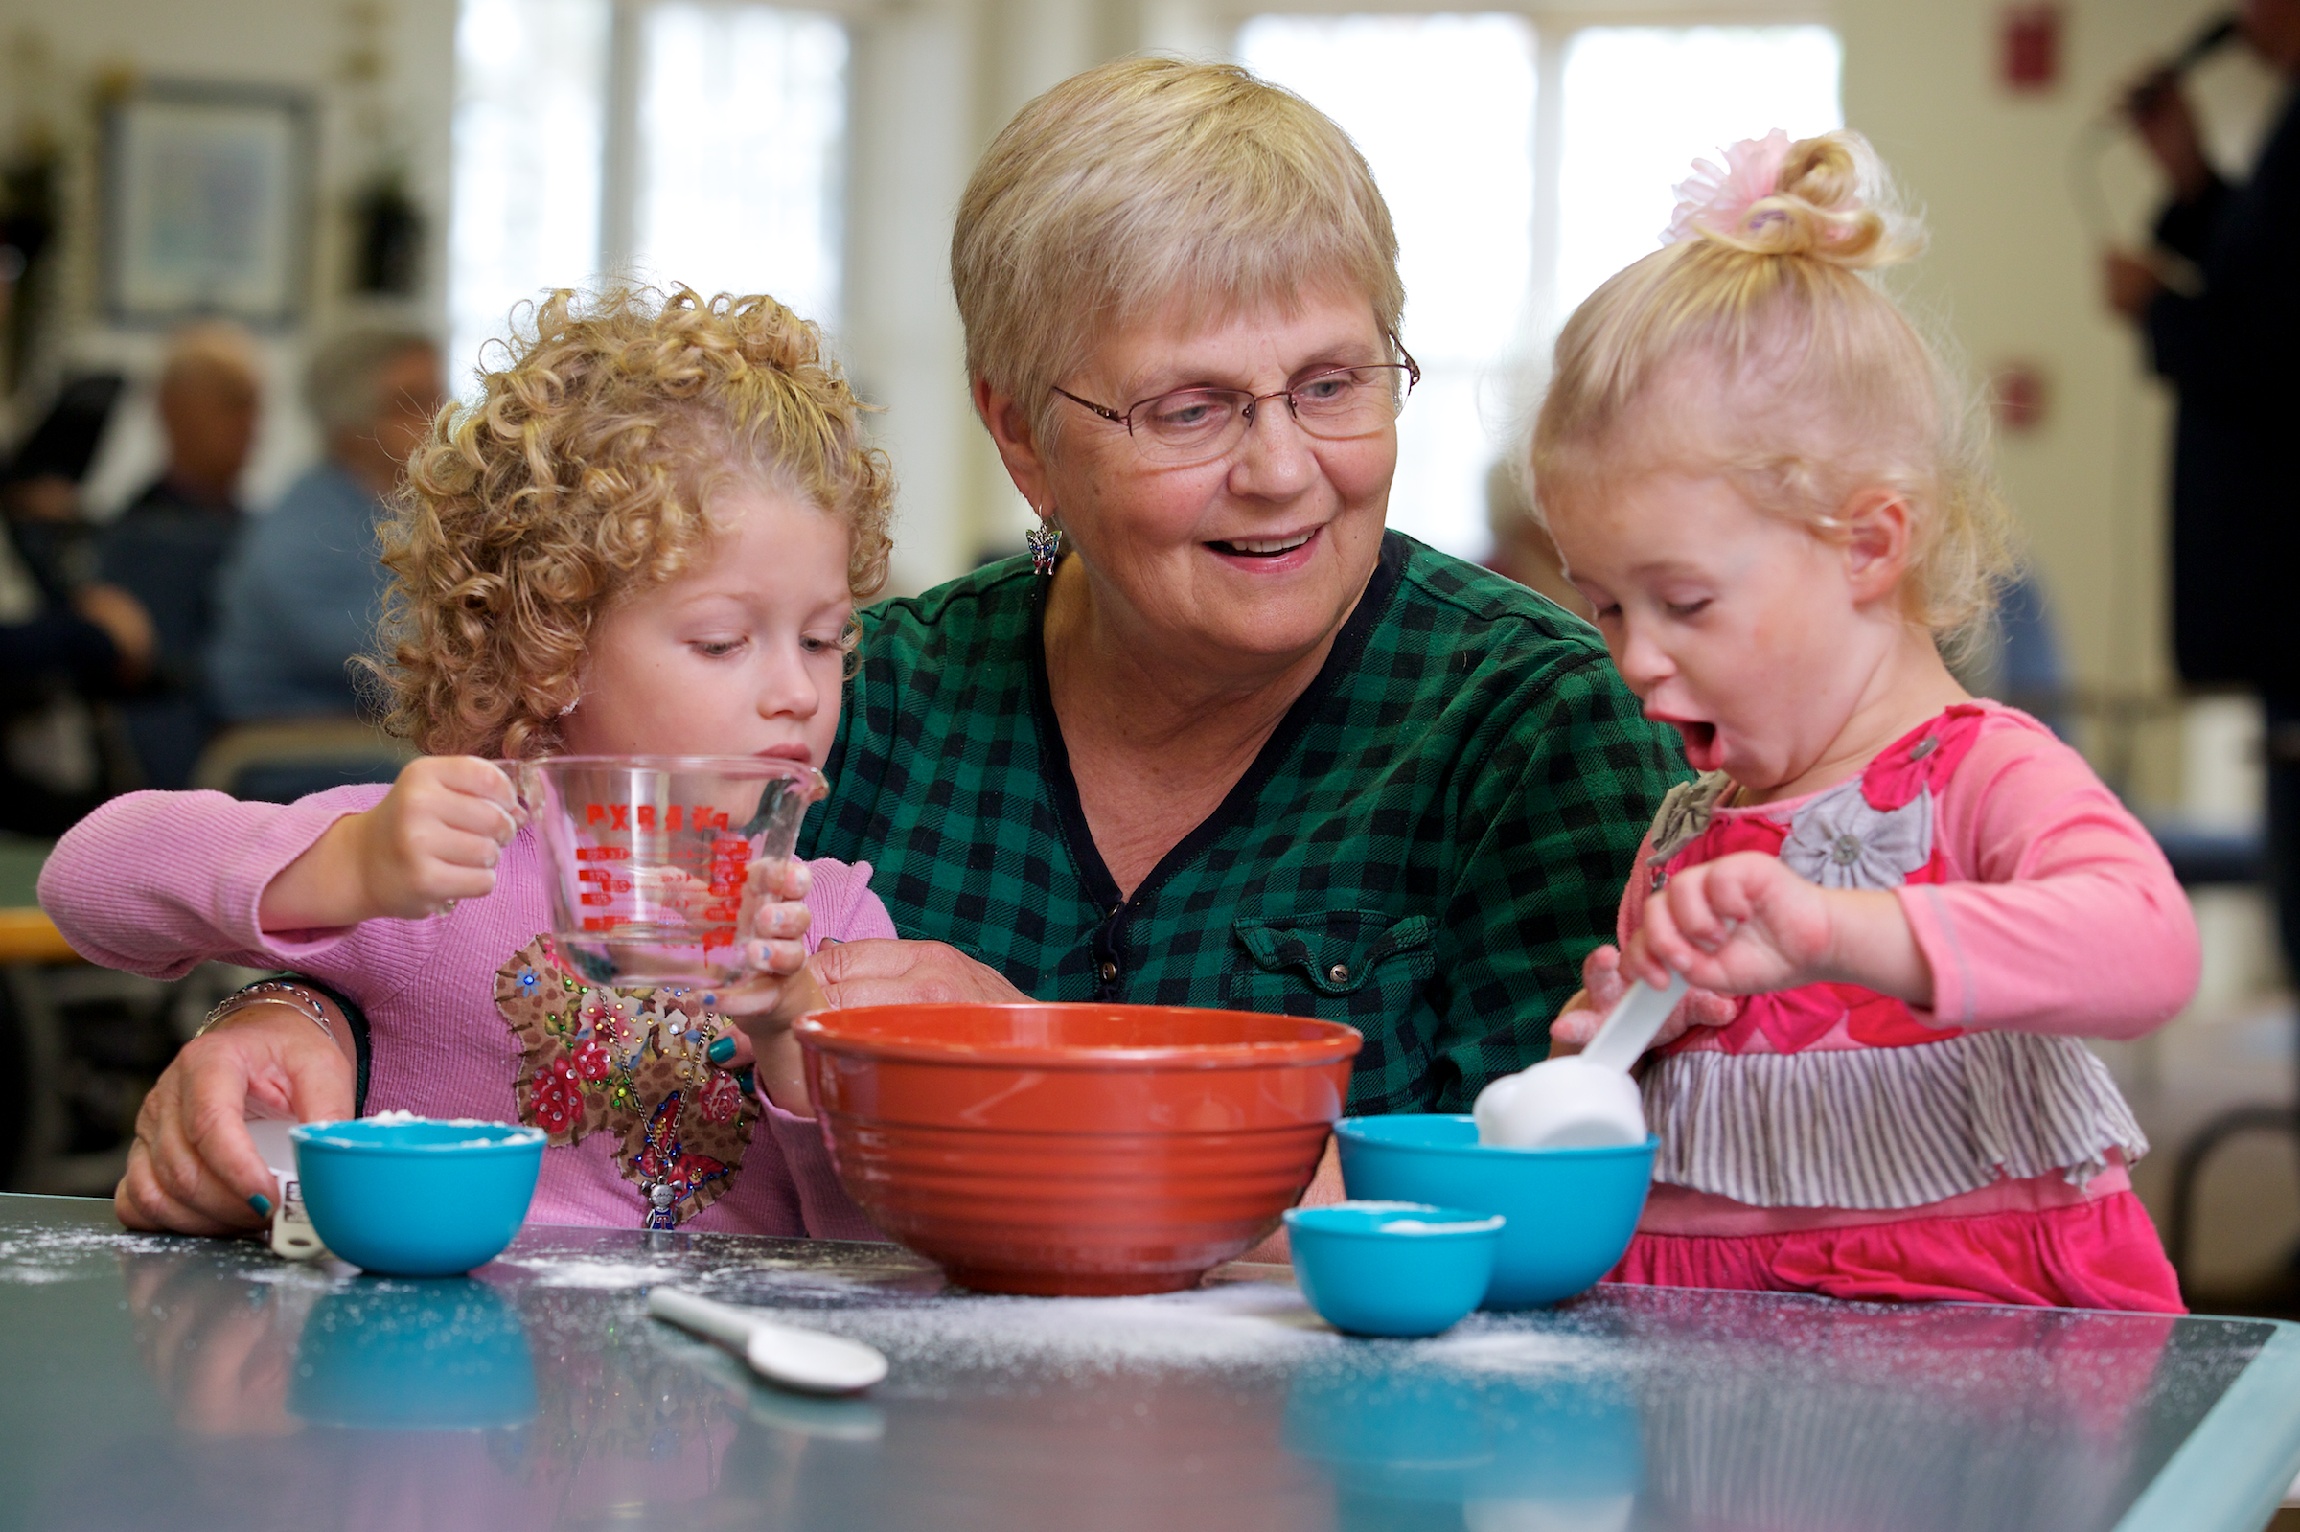 Adult day participant with children baking-1